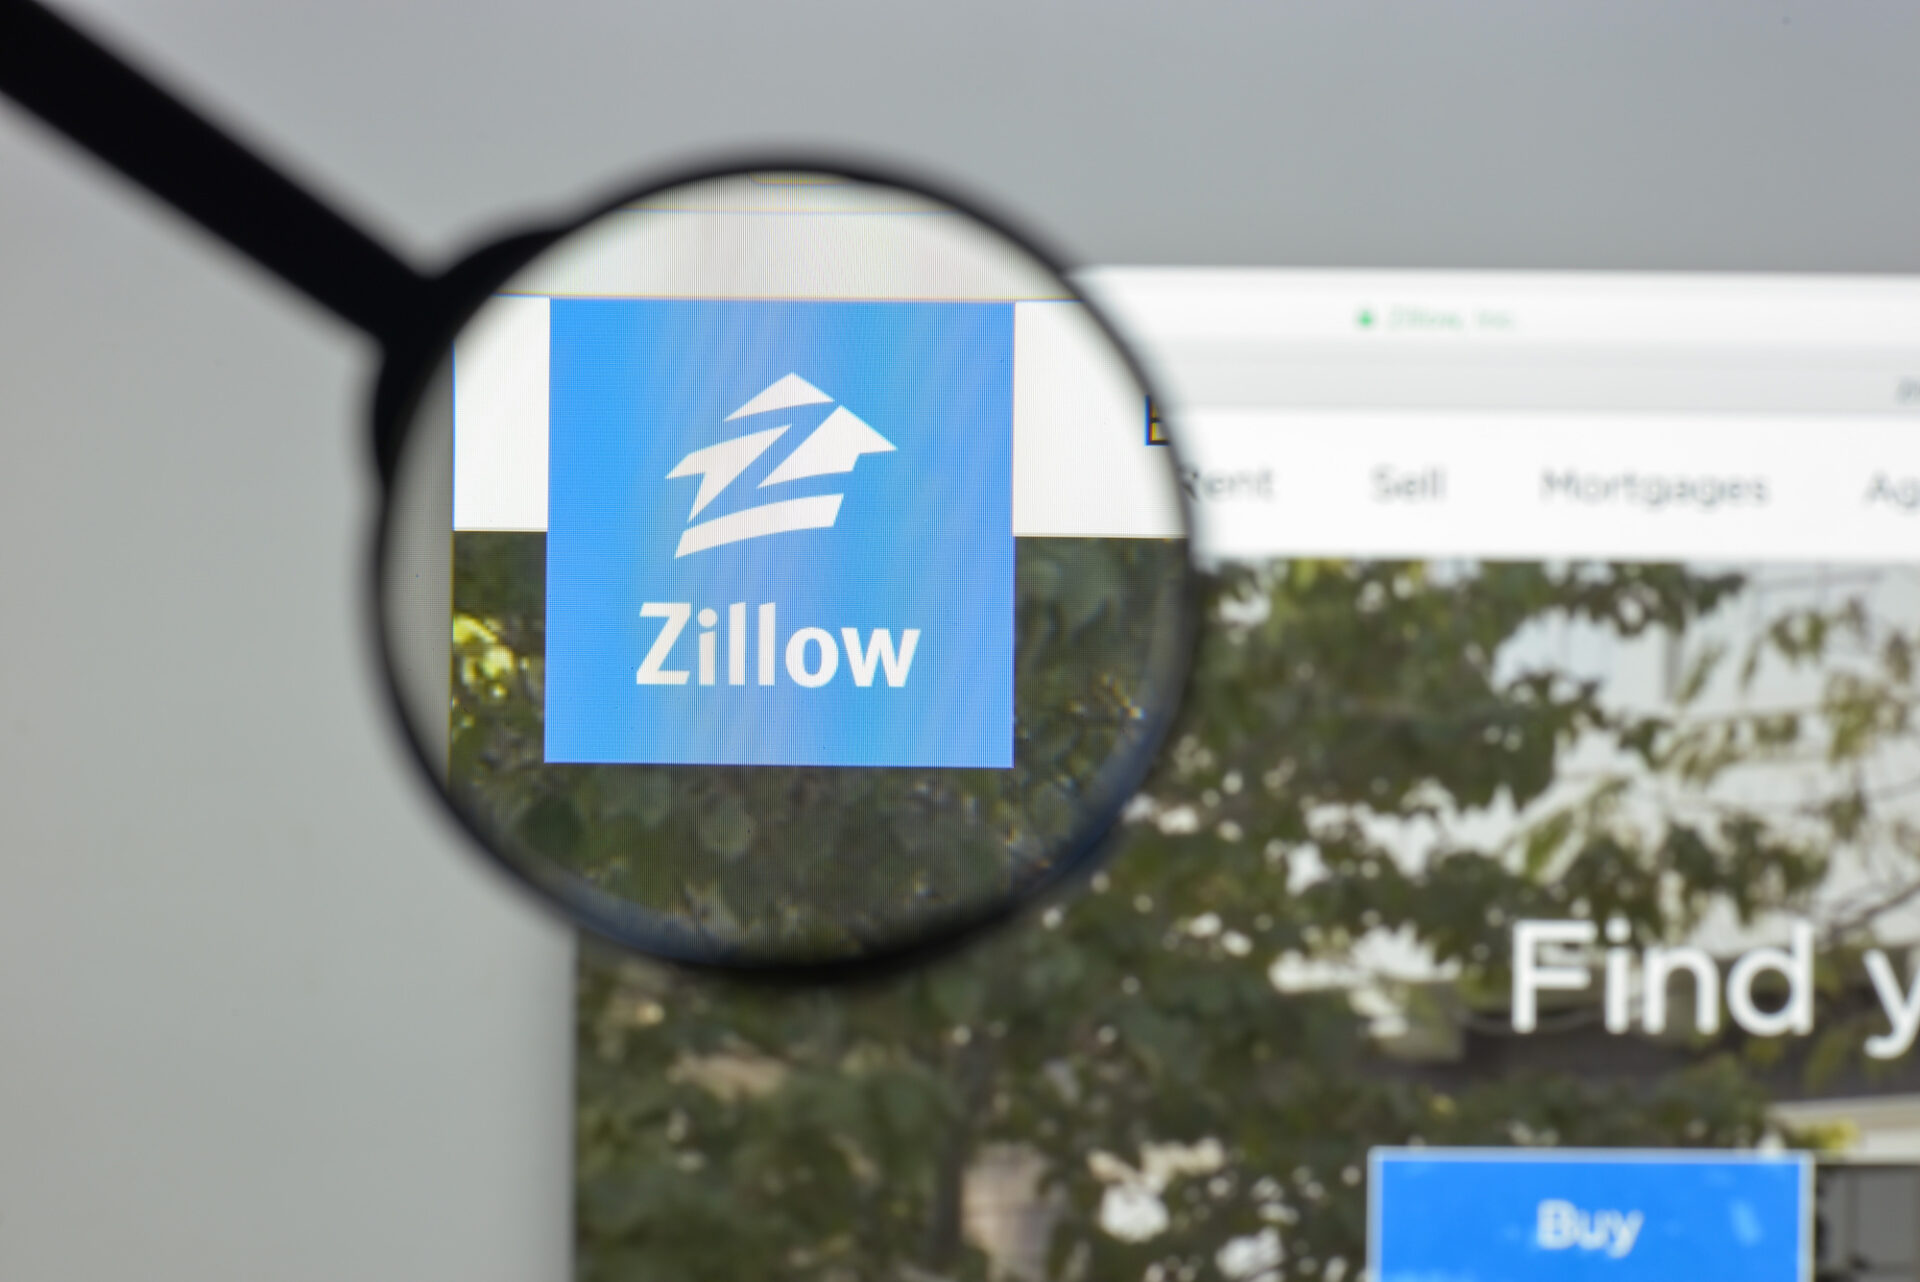 Lawsuit Claims Zillow Purposely Mislead Investors With Public Statements